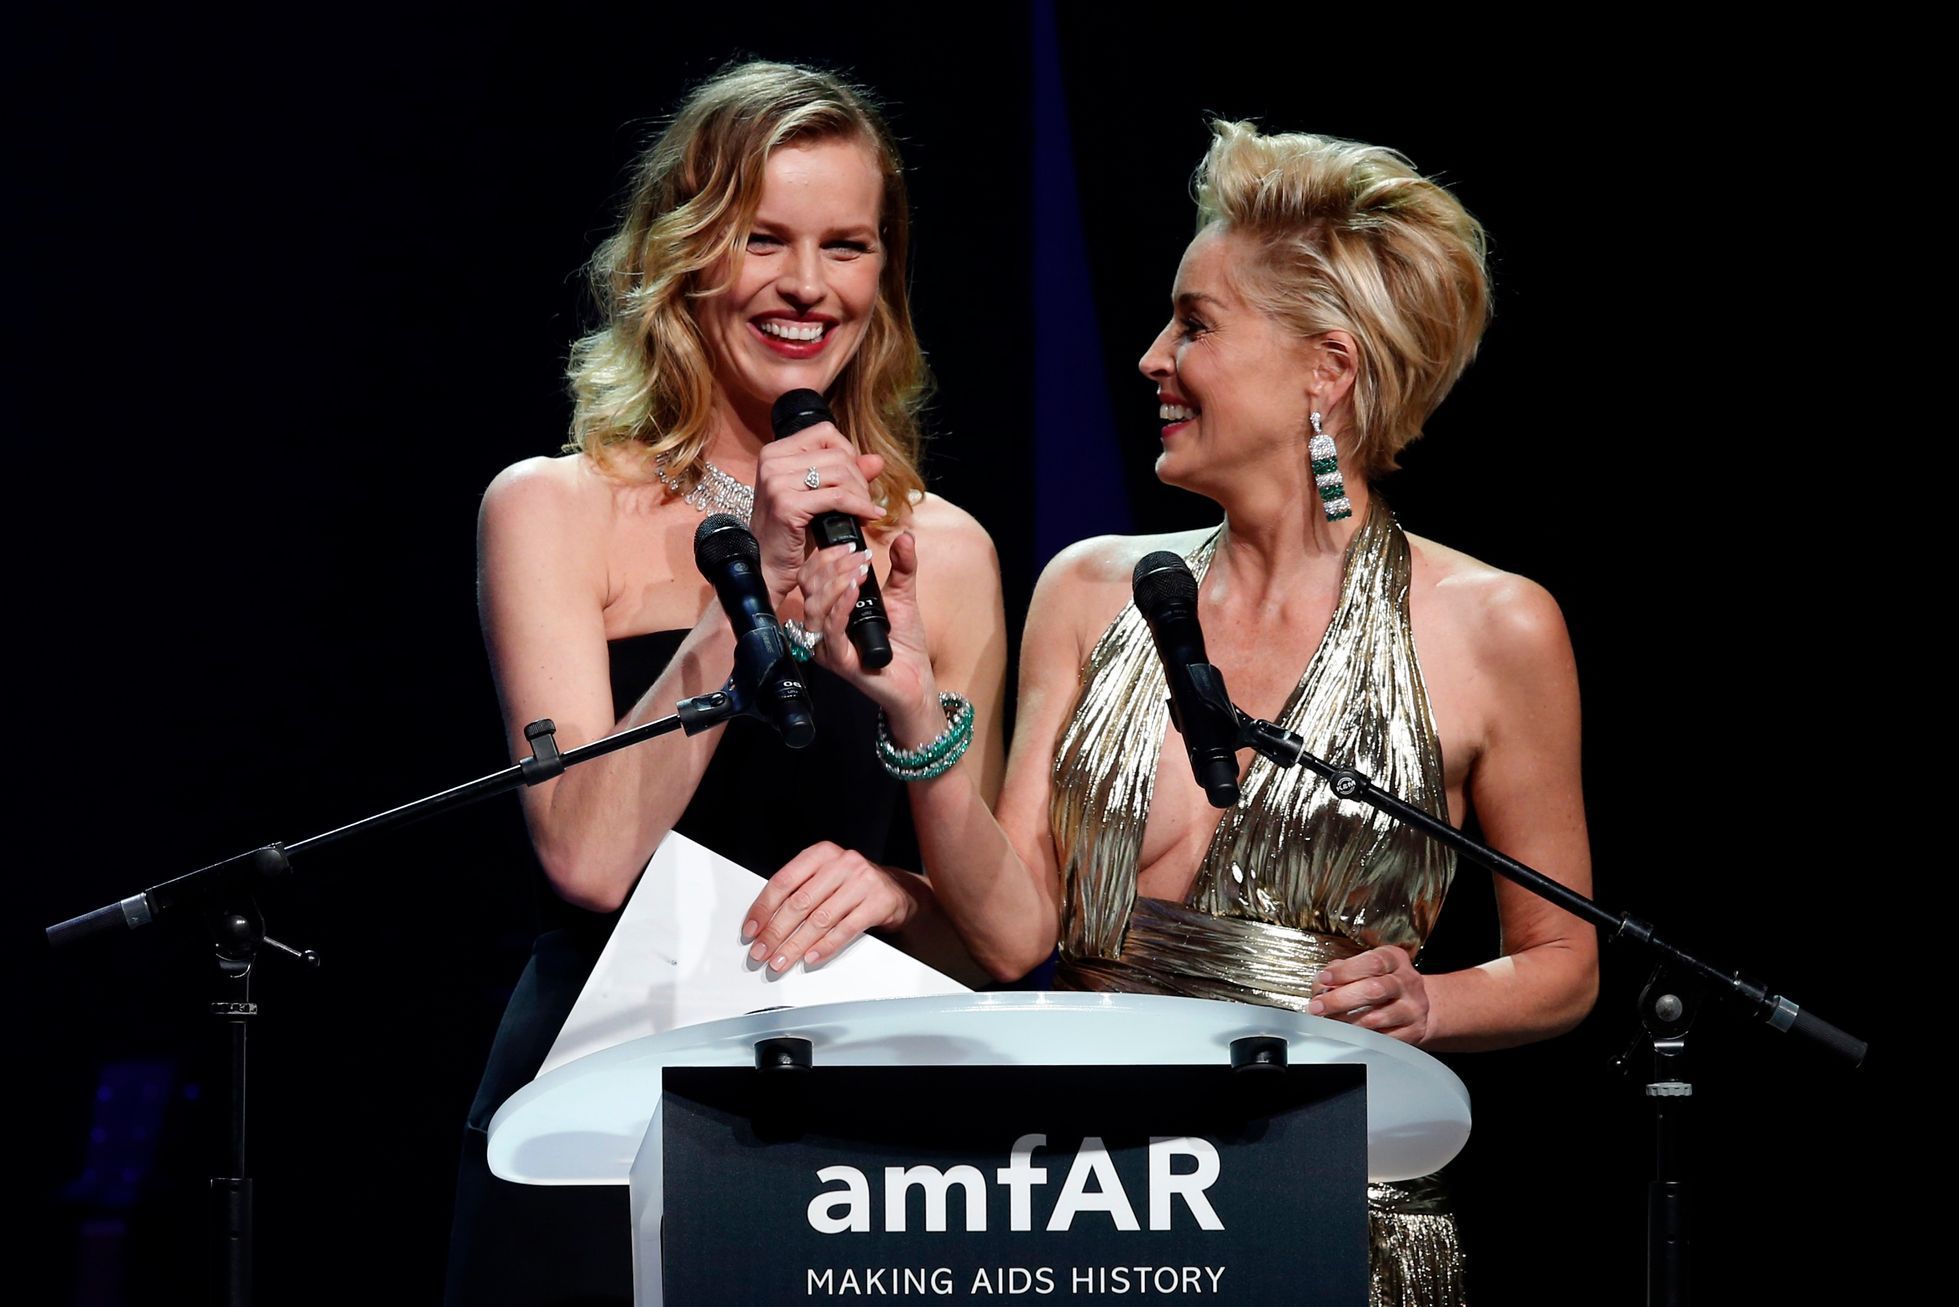 Model Herzigova of the Czech Republic and actress Stone of the U.S. attend an auction at the amfAR's Cinema Against AIDS 2014 event in Antibes